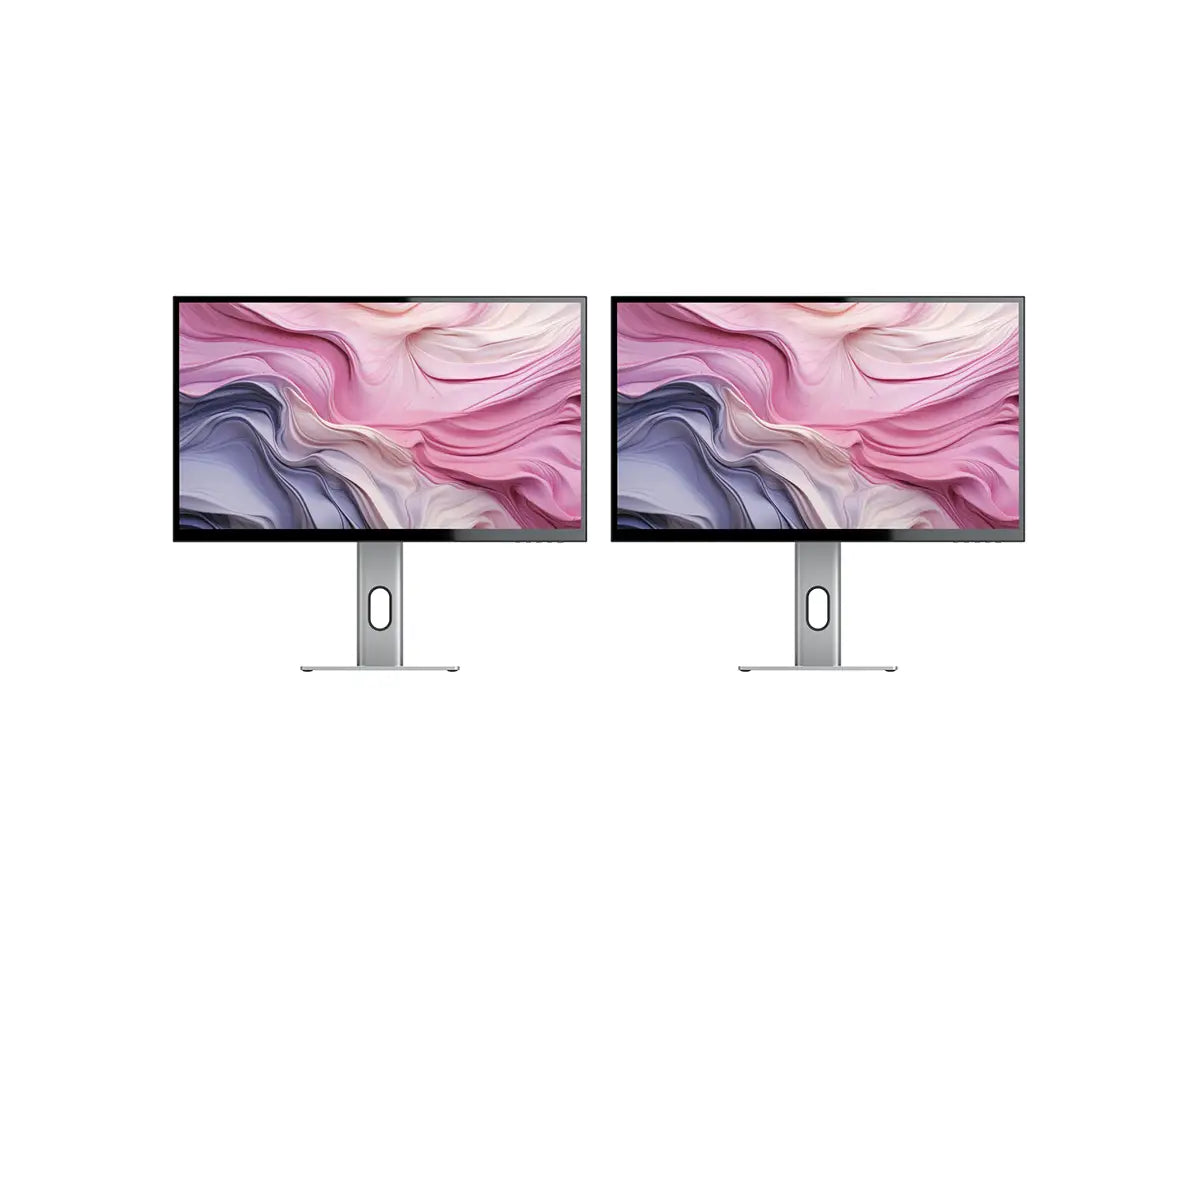 CLARITY 27" UHD 4K Monitor (Pack of 2)